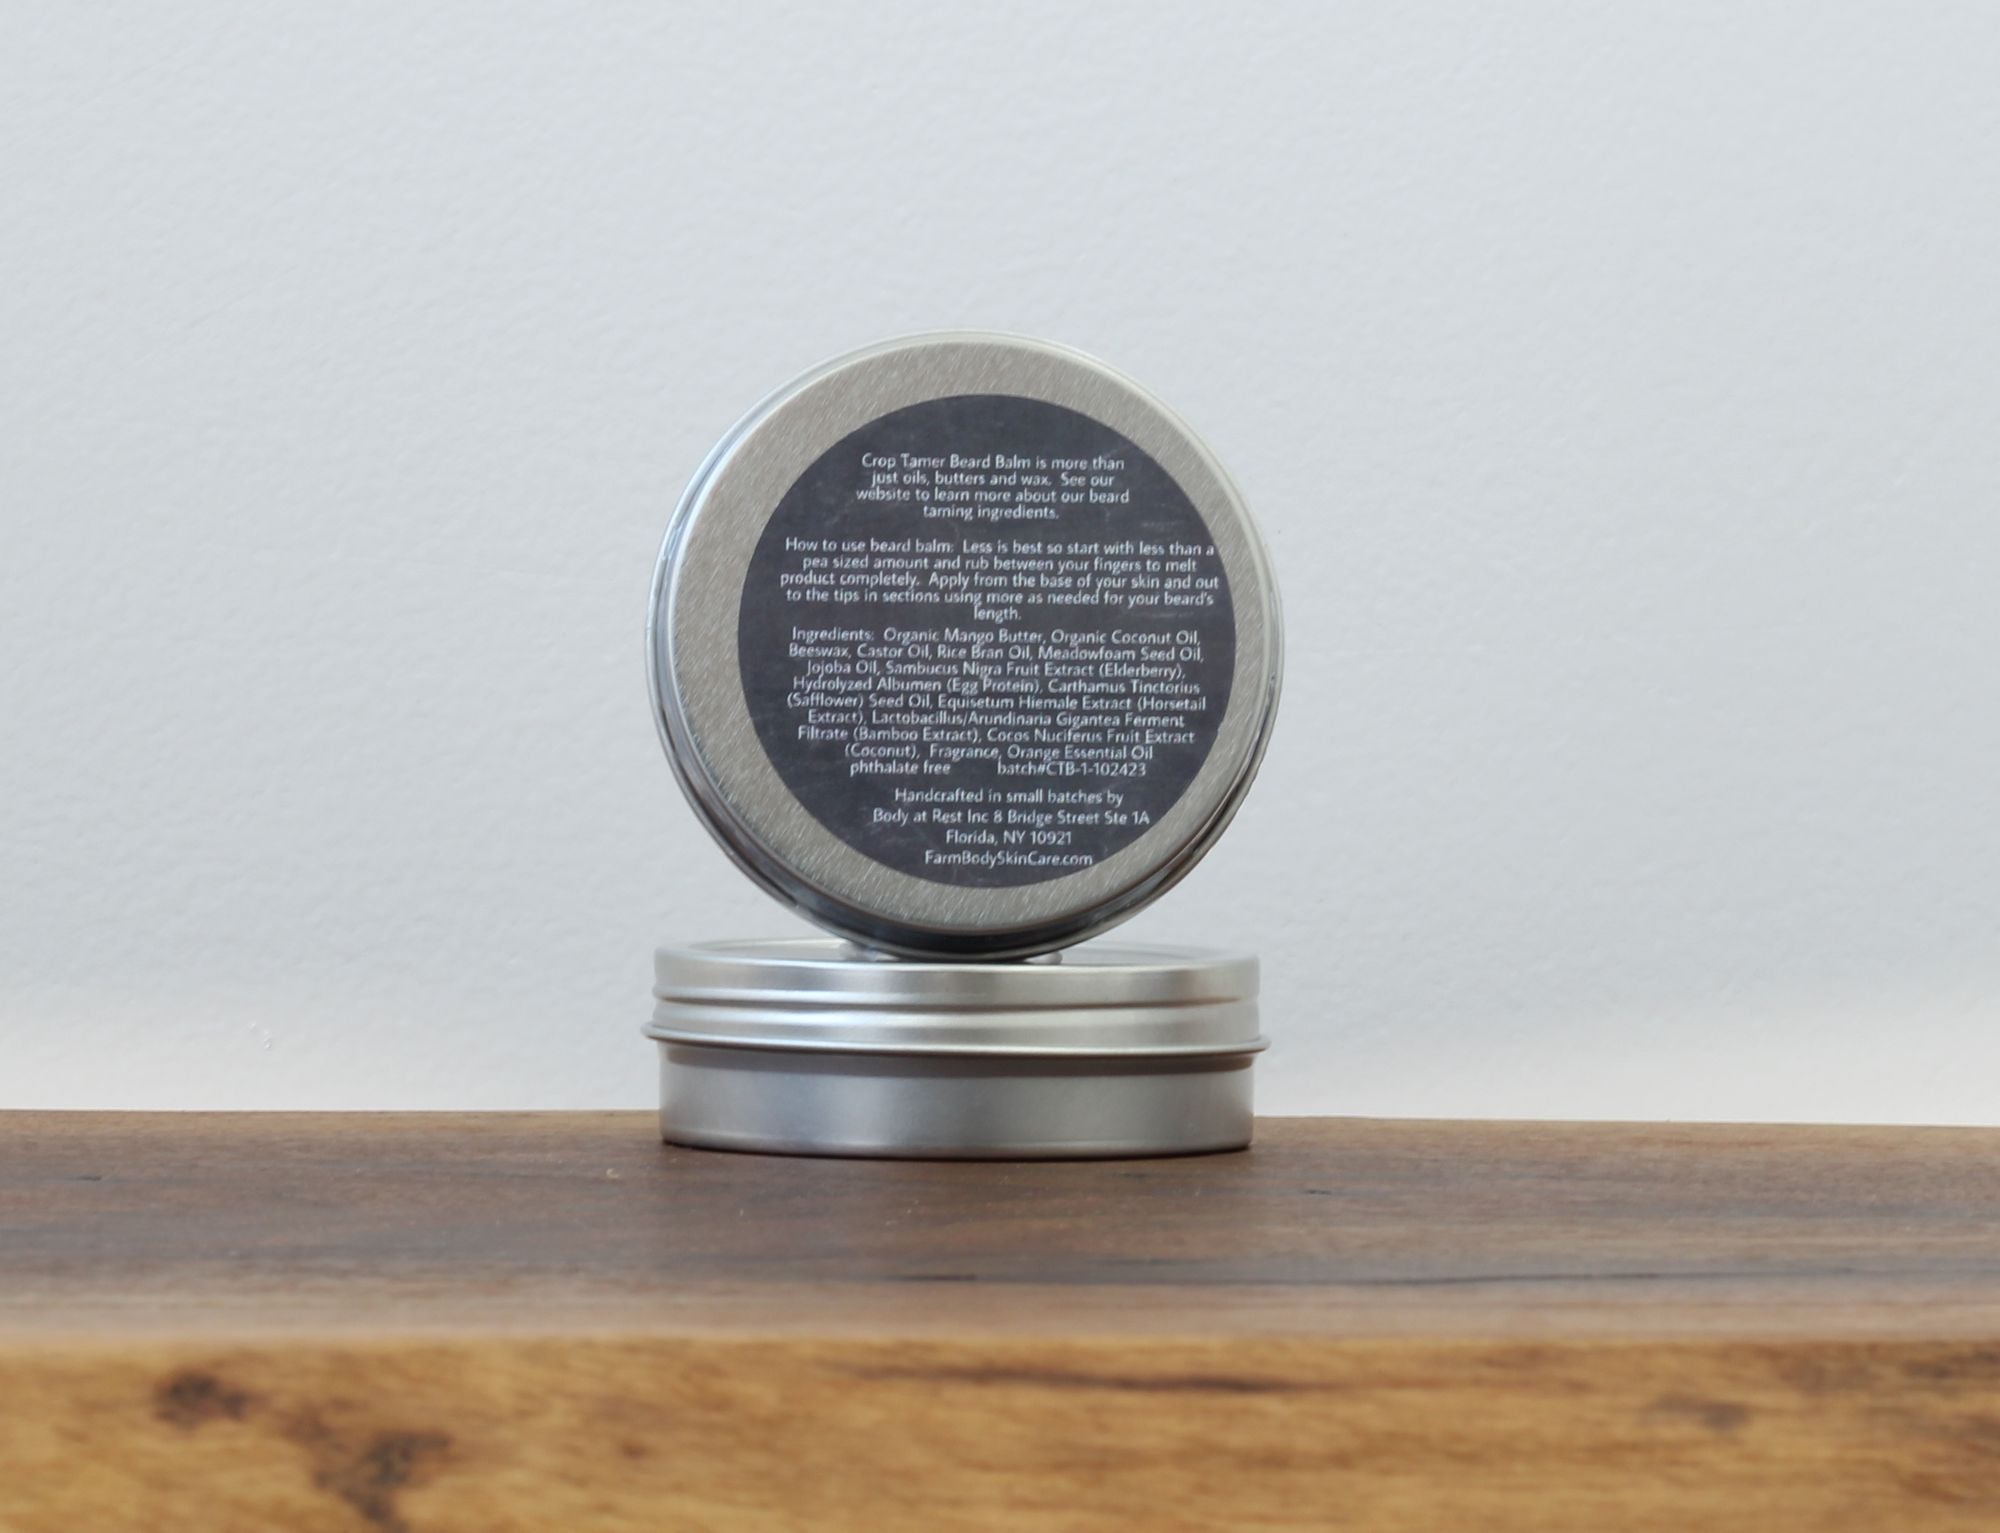 Farmbody Crop Tamer Beard Balm Ingredients with egg protein, horsetail extract and mango butter for the best way to condition your beard ingredients